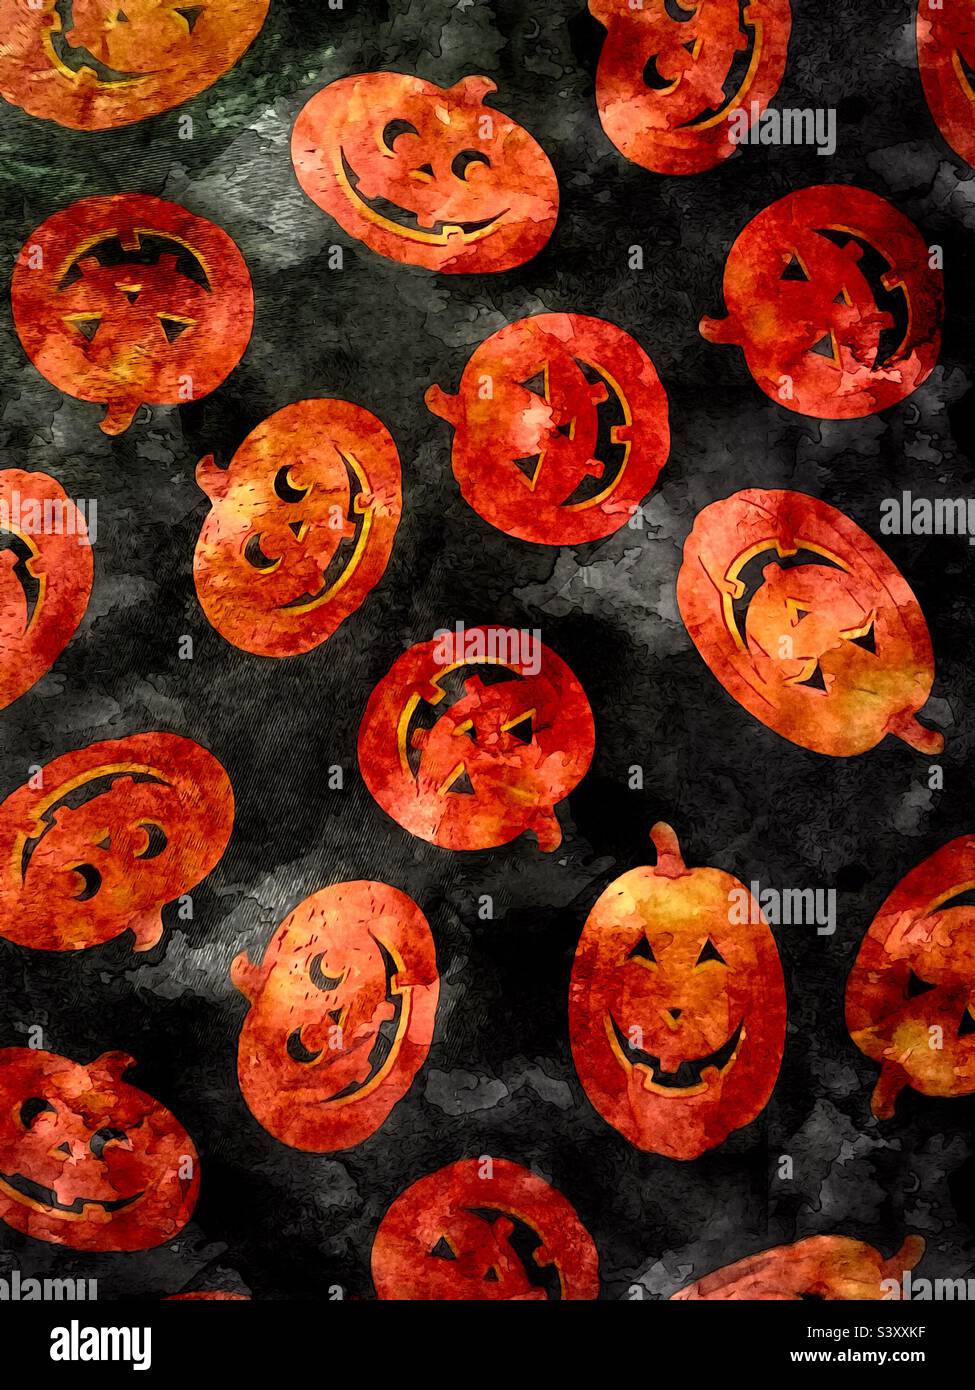 A shot of our seasonal Autumn/October/Halloween tablecloth that is currently adorning our kitchen table. The painterly, textured effect created by IOS app ArtCard. Stock Photo